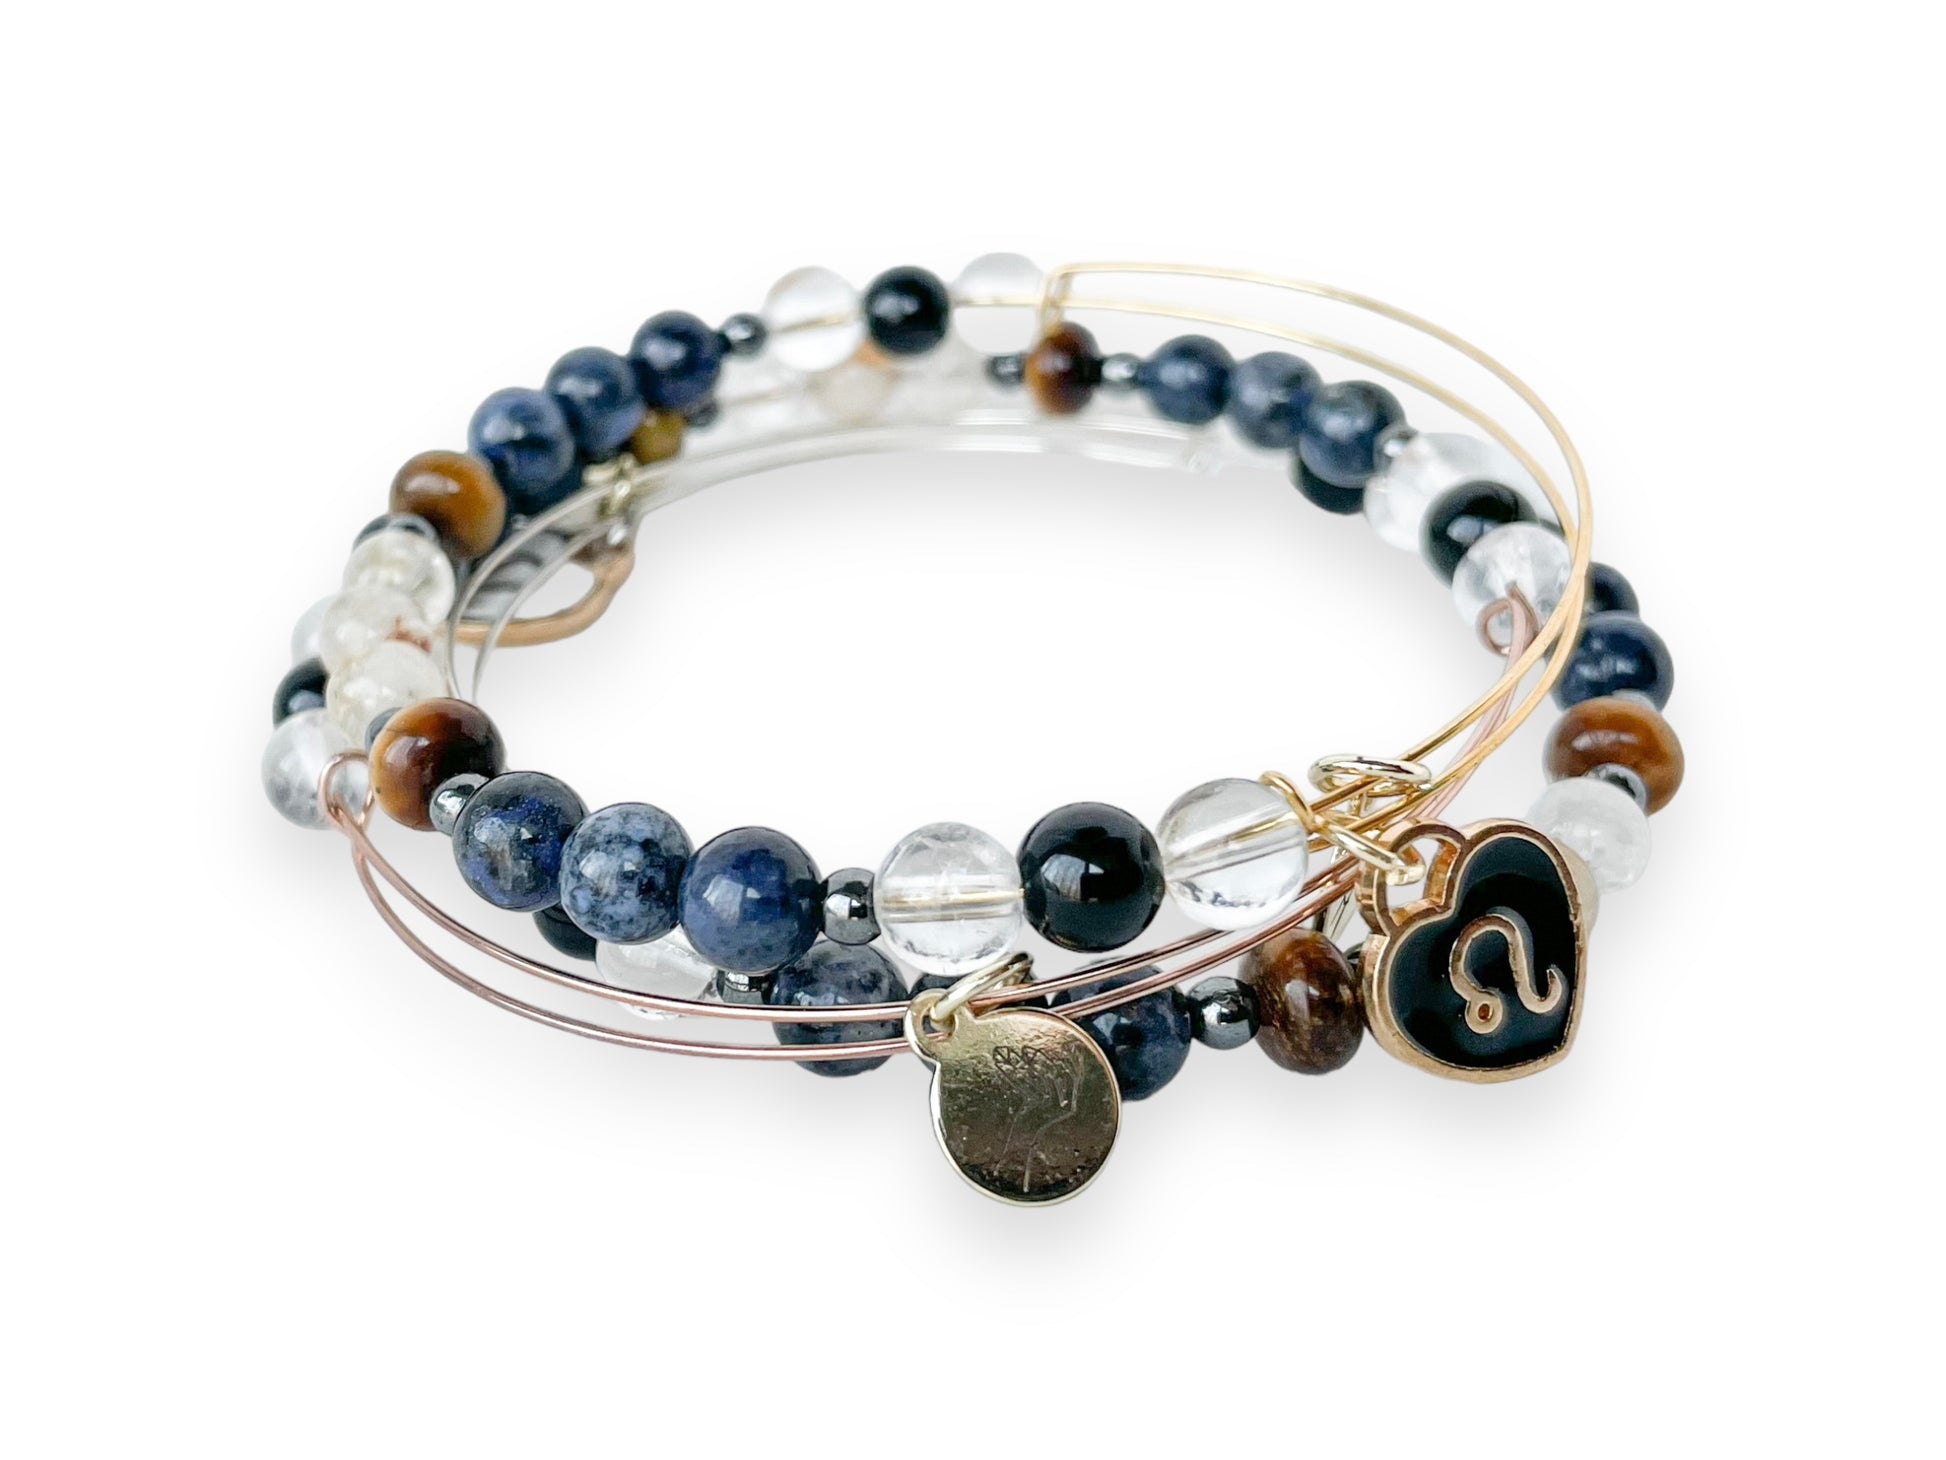 Stack of Leo Bracelets, illustrating the blend for empowerment and style.